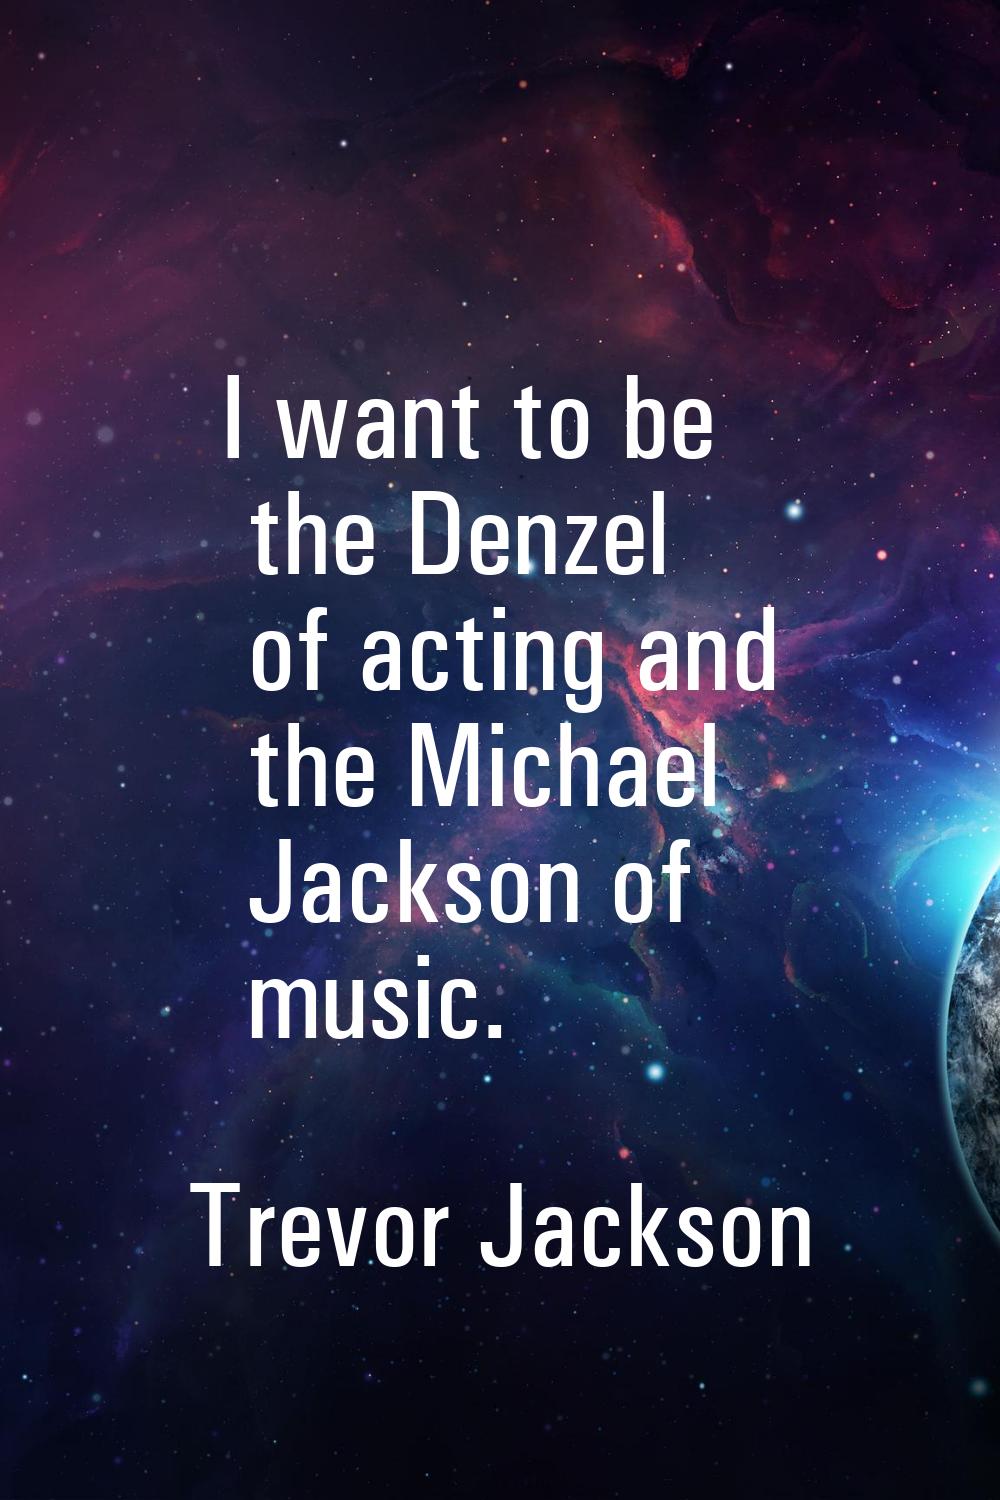 I want to be the Denzel of acting and the Michael Jackson of music.